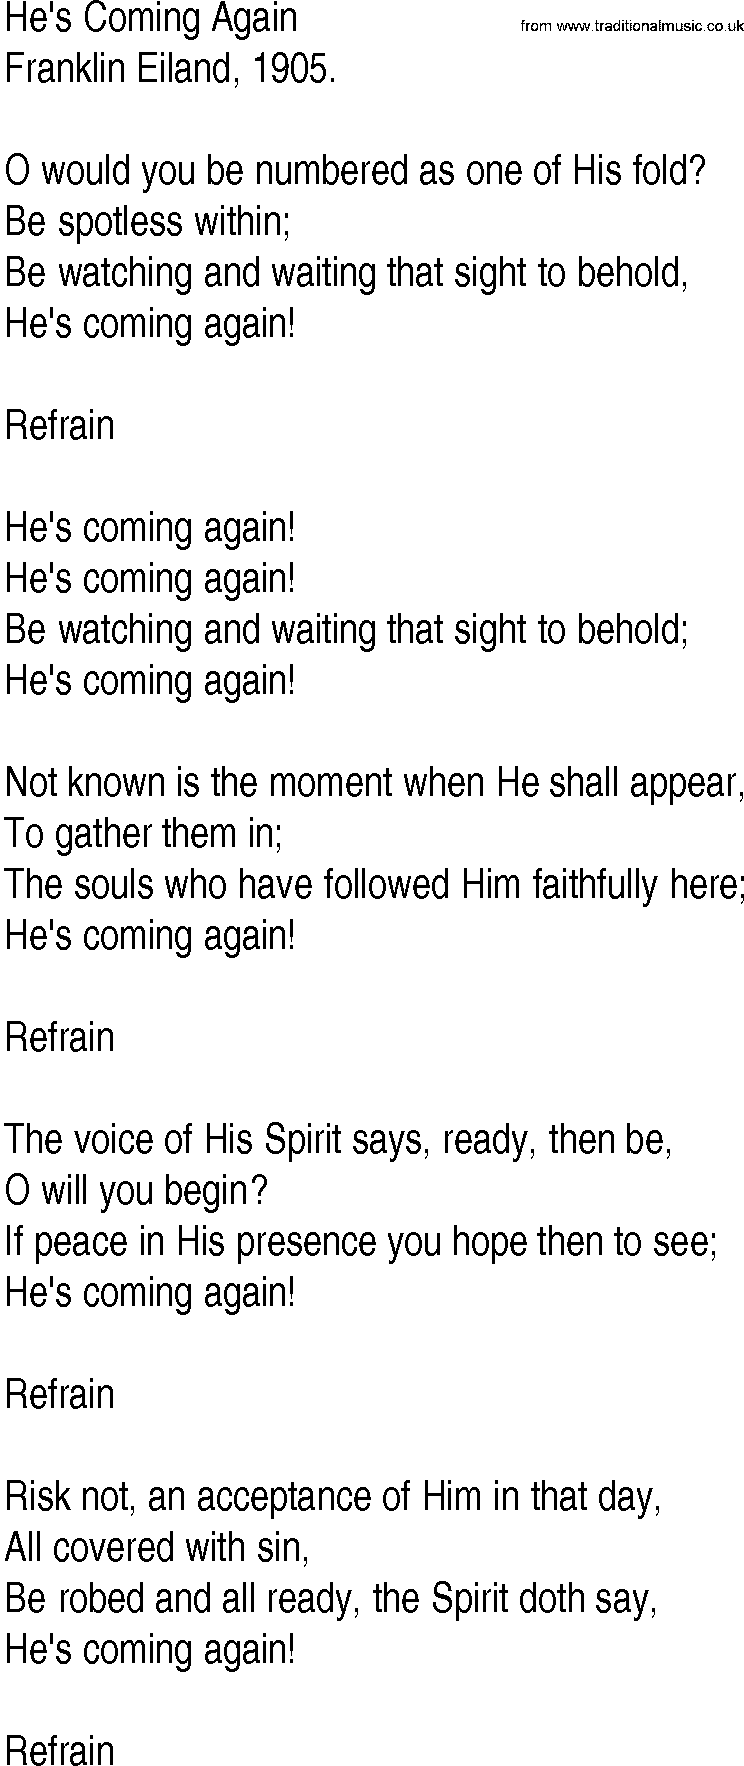 Hymn and Gospel Song: He's Coming Again by Franklin Eiland lyrics